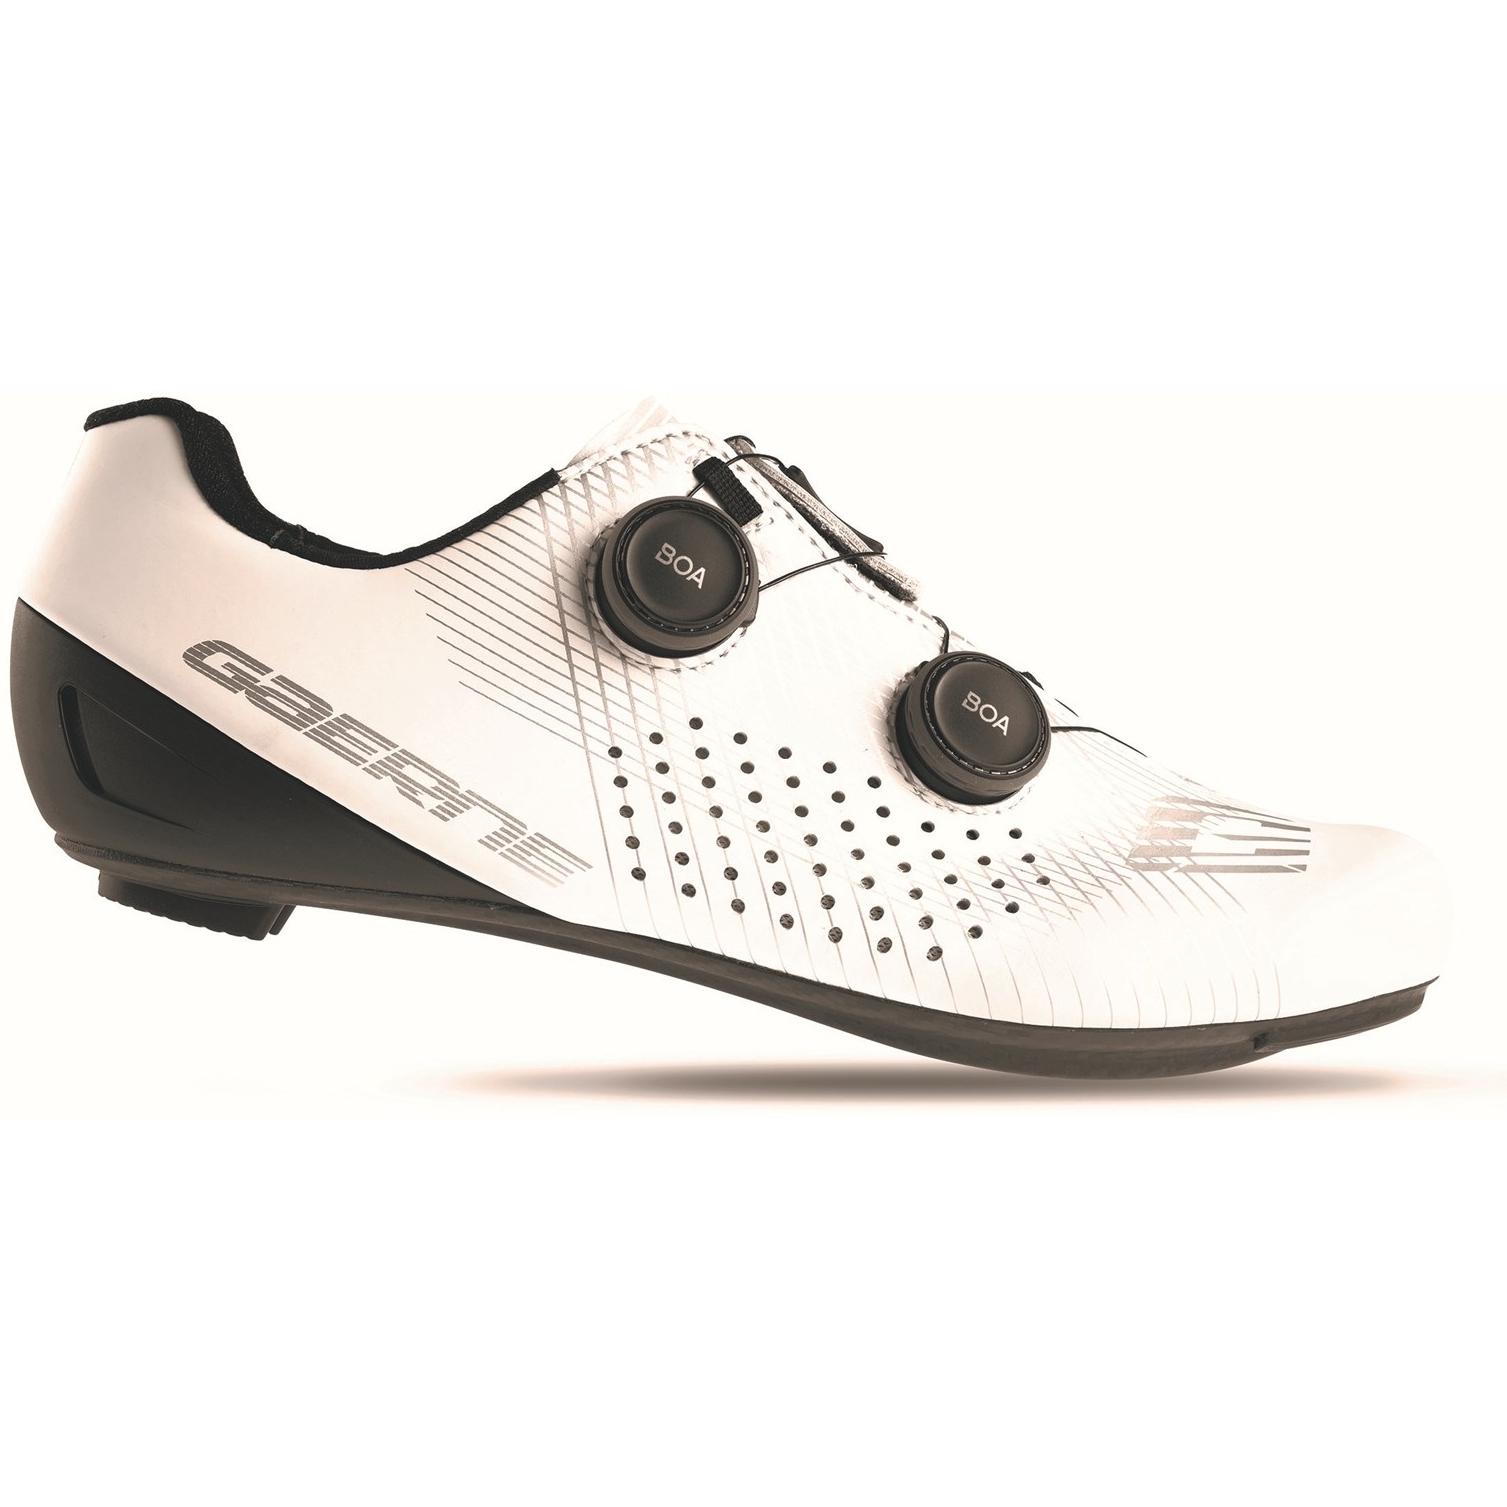 Picture of Gaerne Carbon G.Fuga Road Shoes - matt white